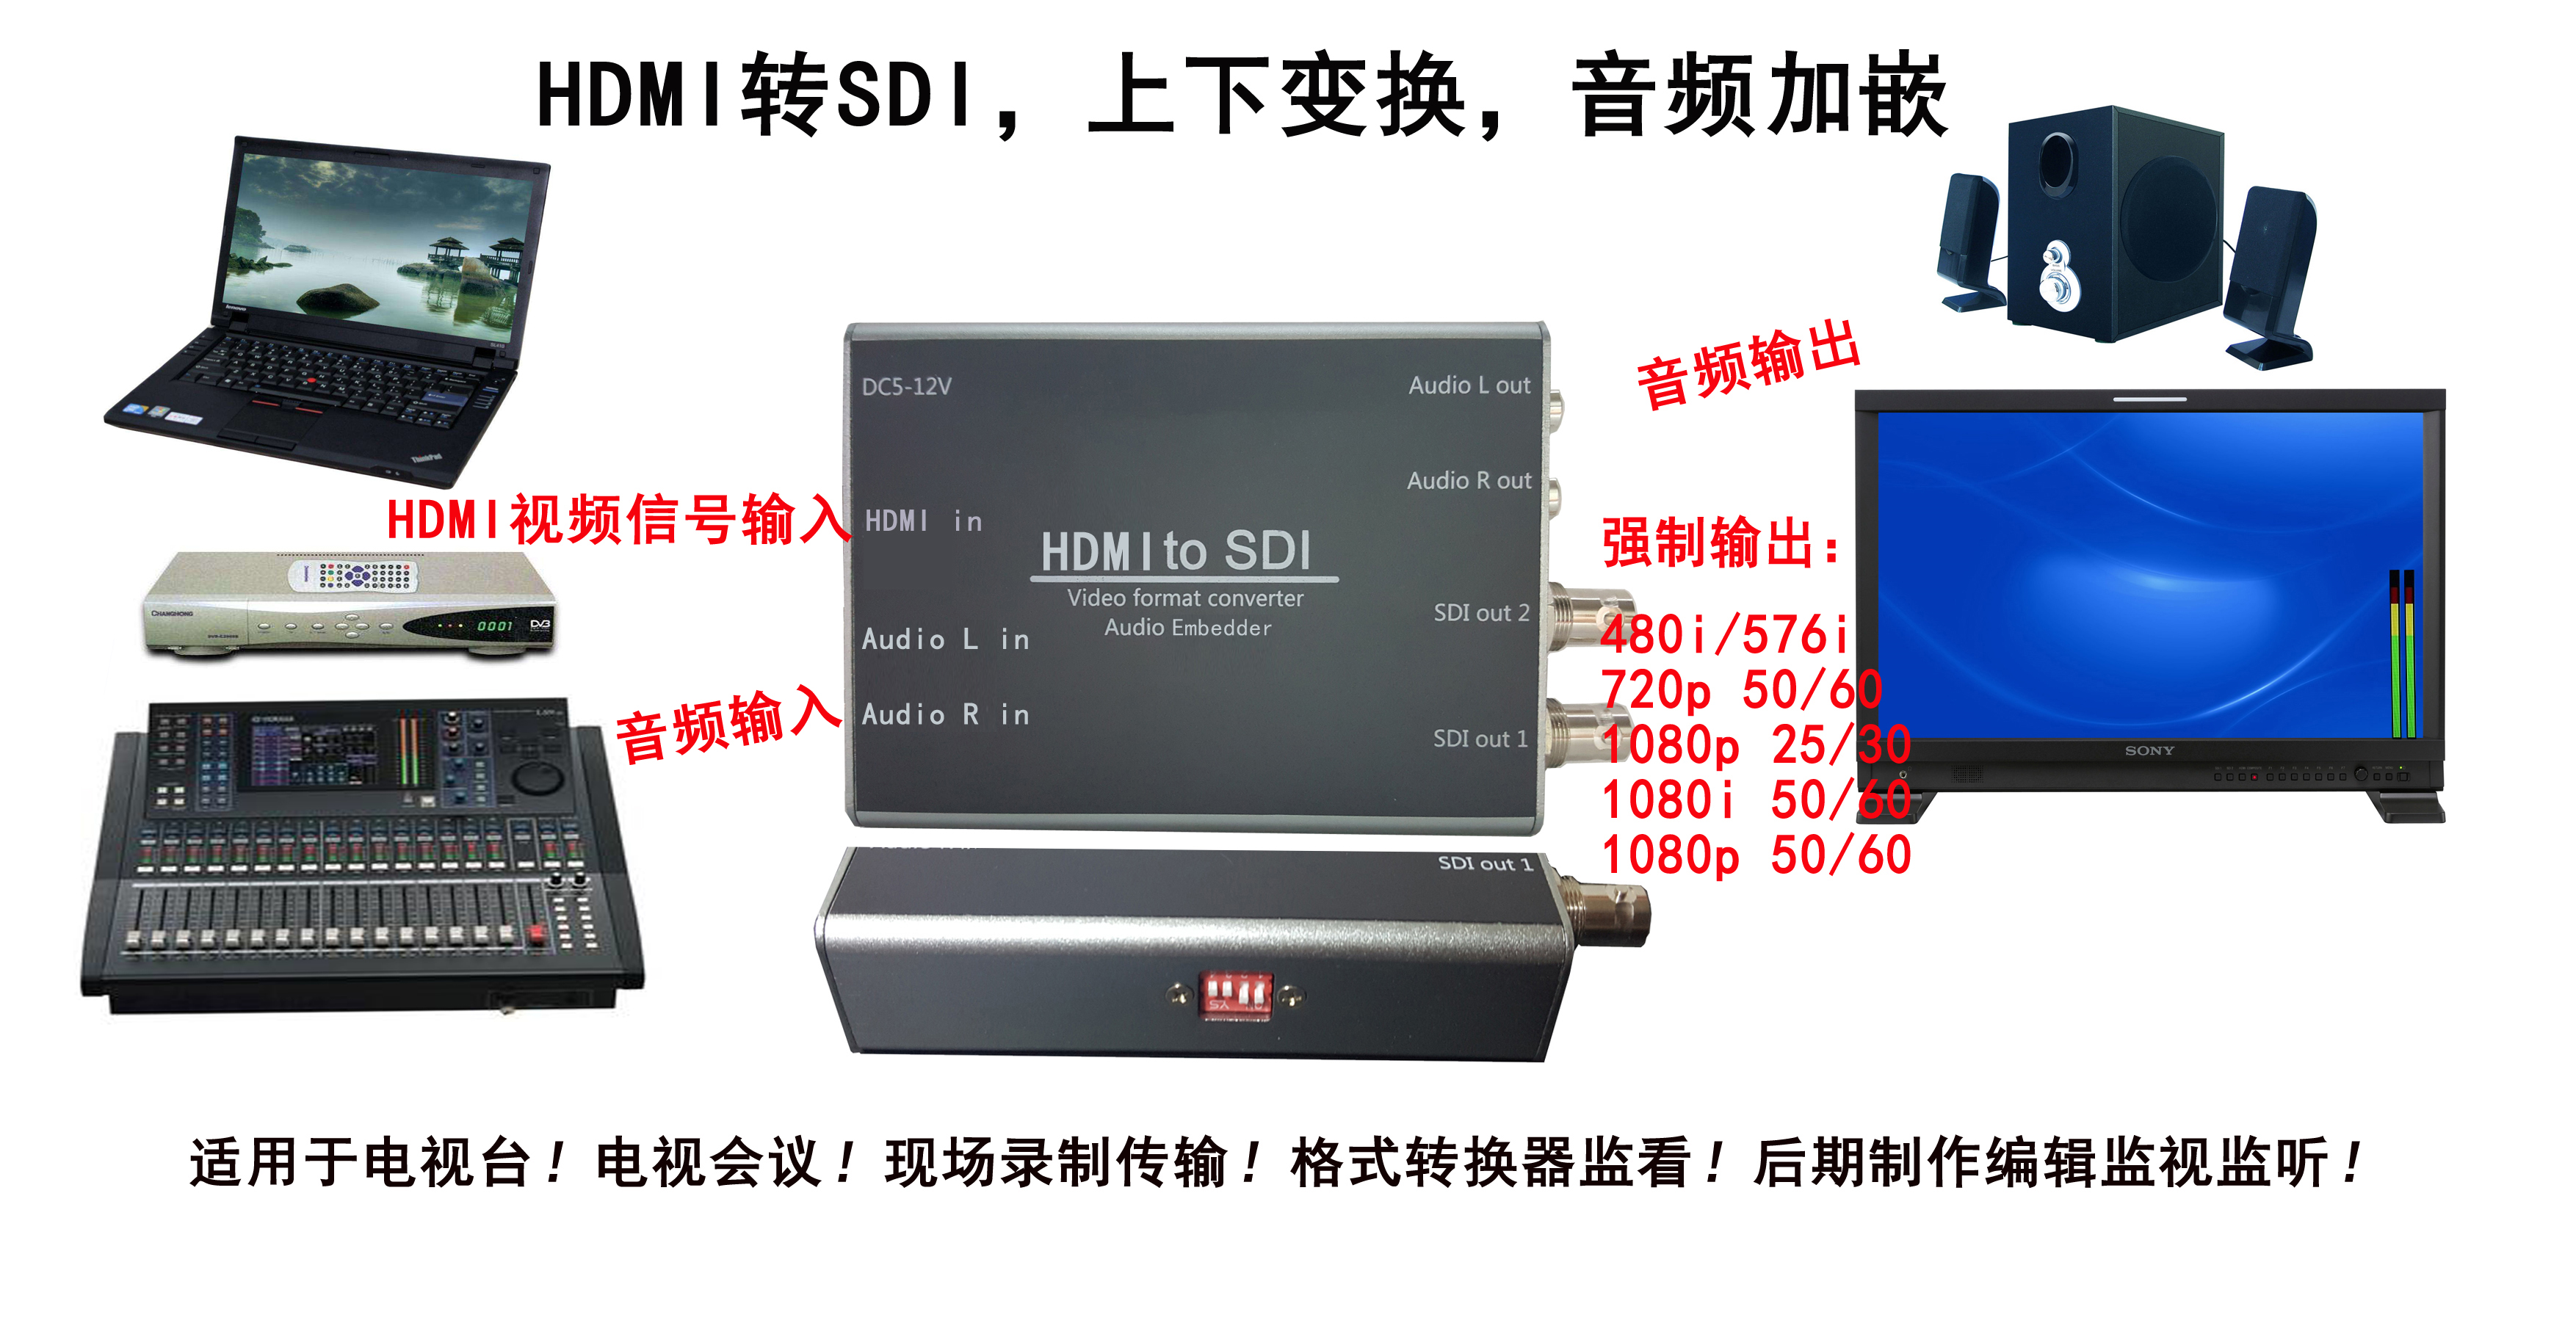 HDMI TO SDI UP AND DOWN CONVERTER